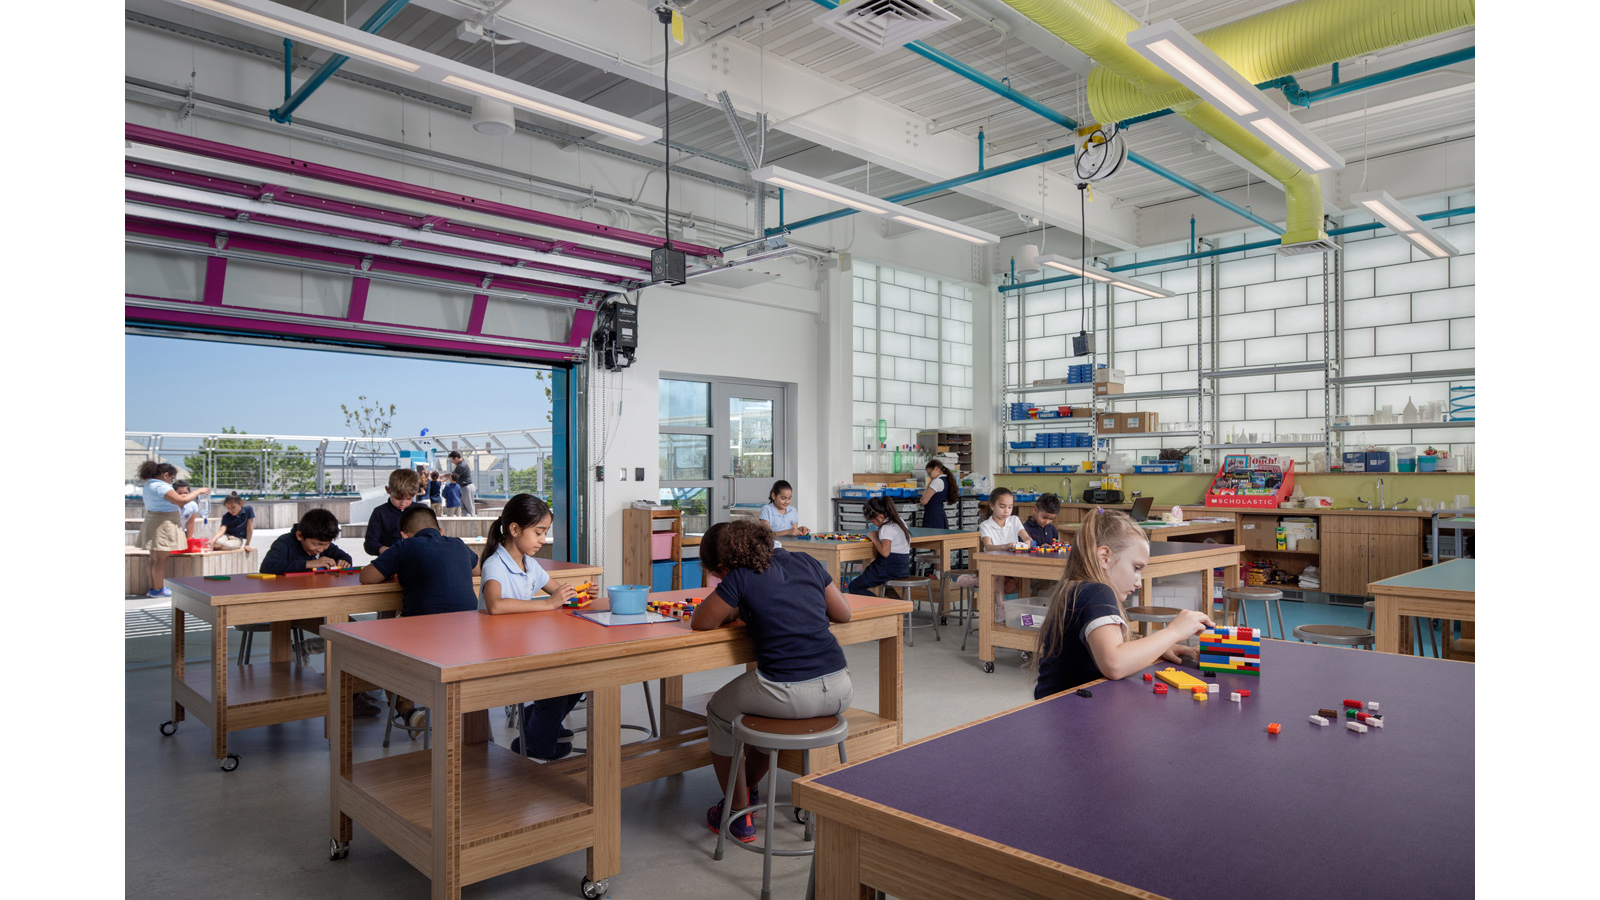 Irwin Jacobs Elementary School Interior, Makers space classroom on roof with roof access to deck